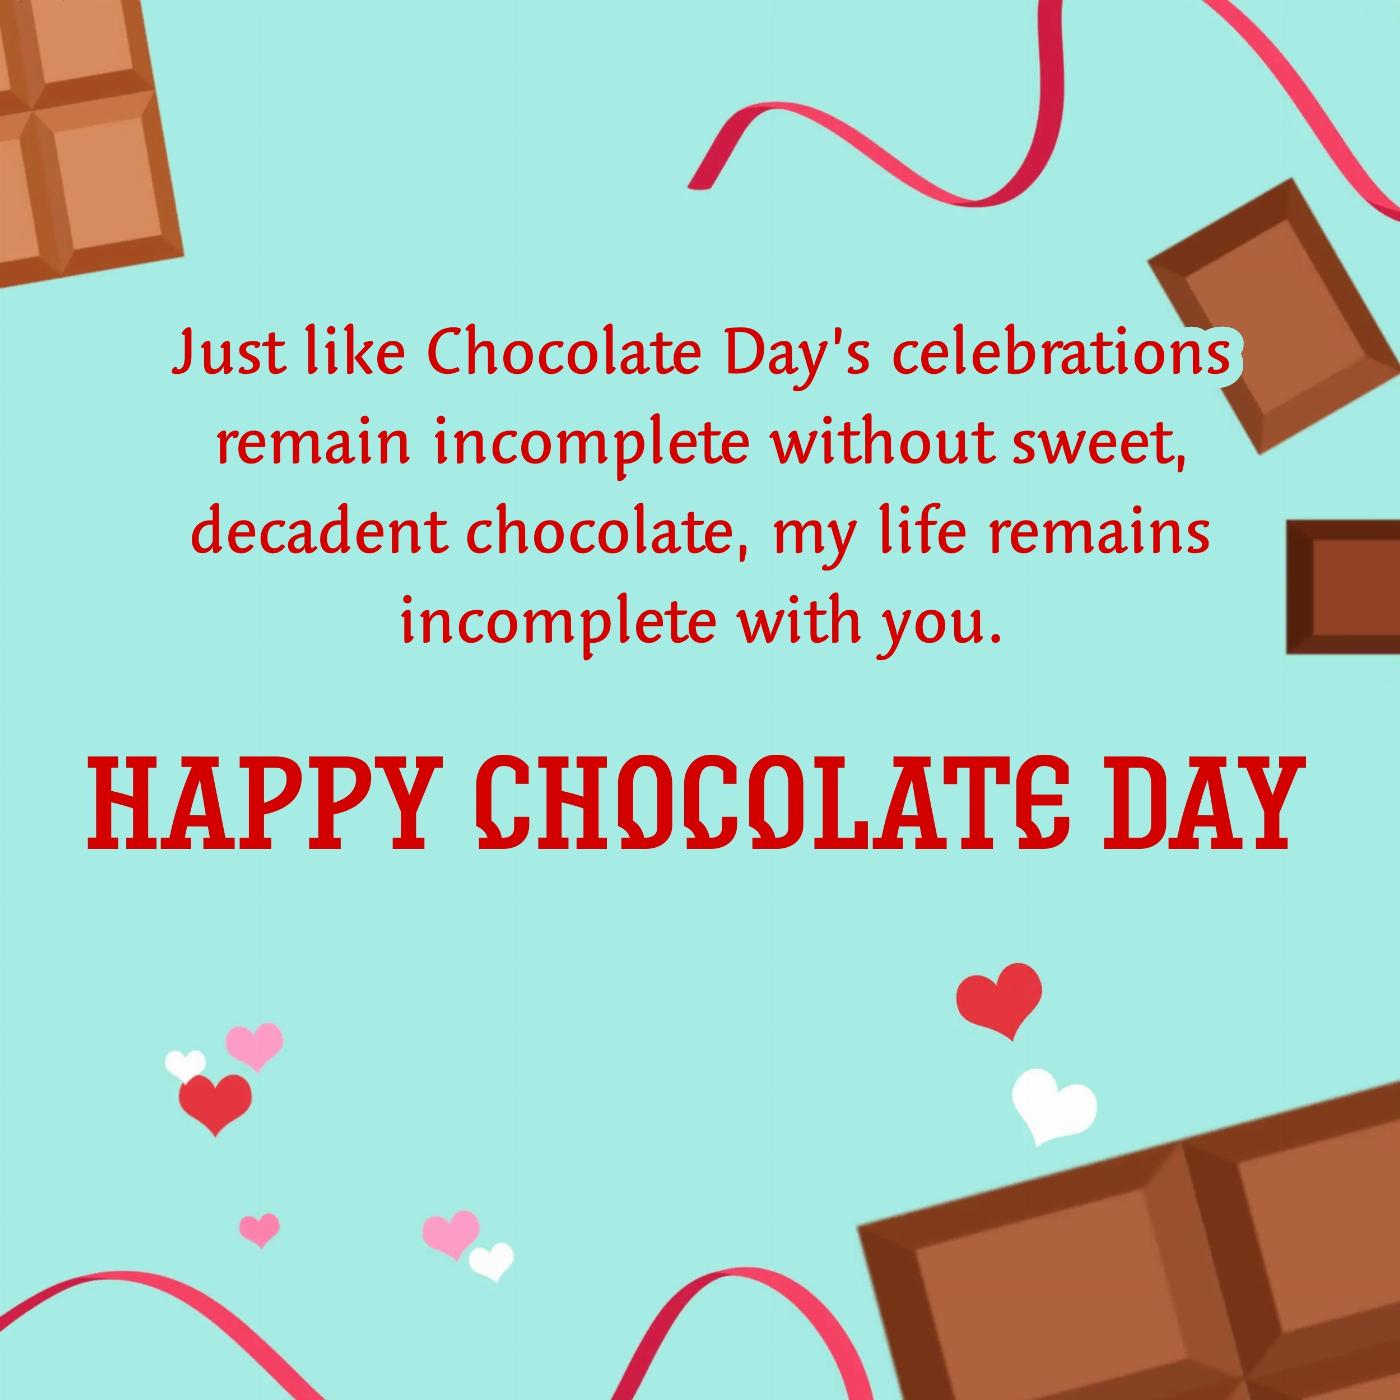 Just like Chocolate Days celebrations remain incomplete